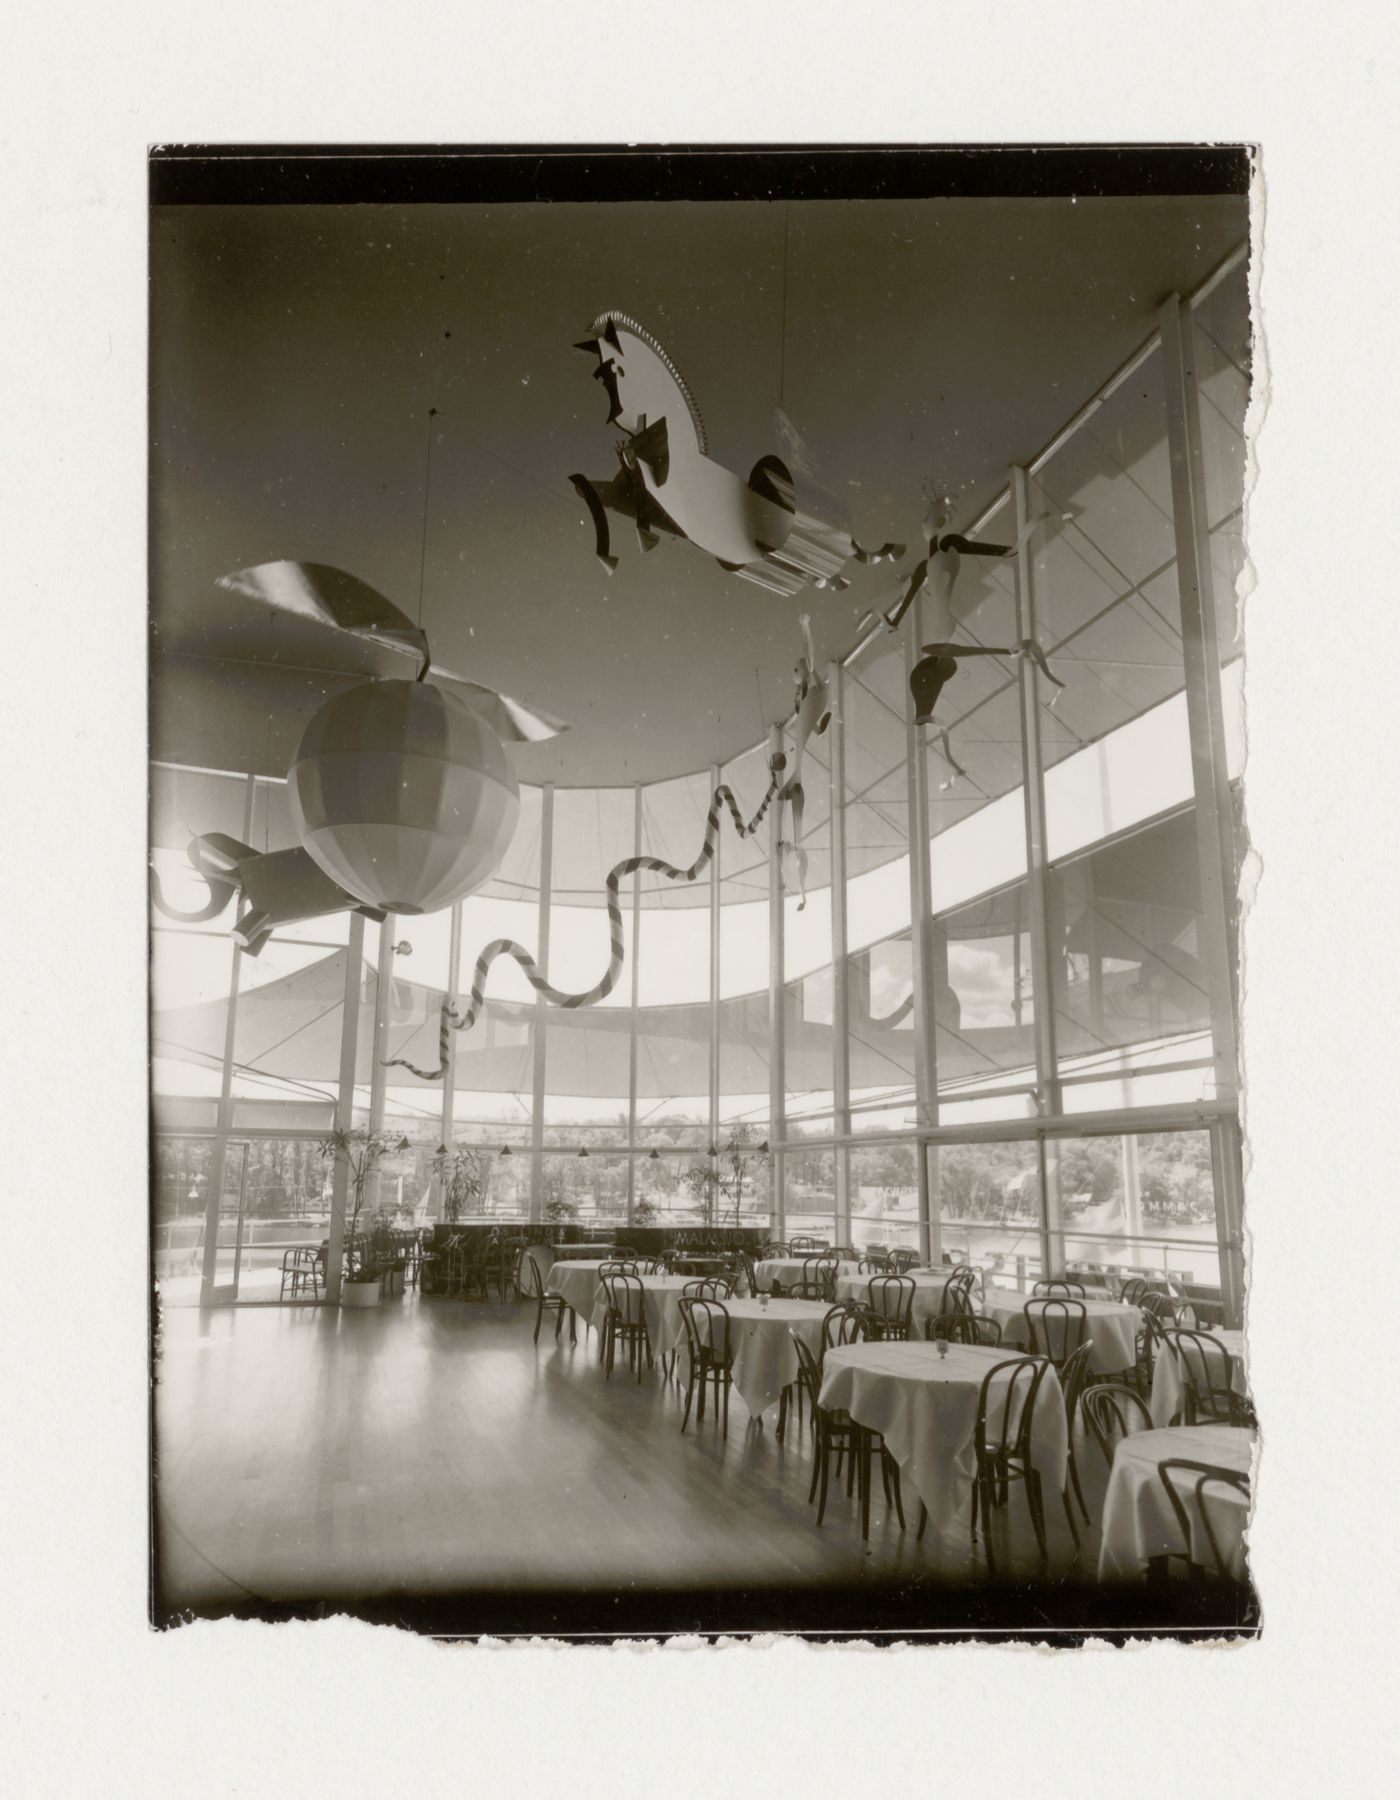 Interior view of the Paradise Restaurant dance hall at the Stockholm Exhibition of 1930 showing ceiling ornaments, tables and chairs, Stockholm